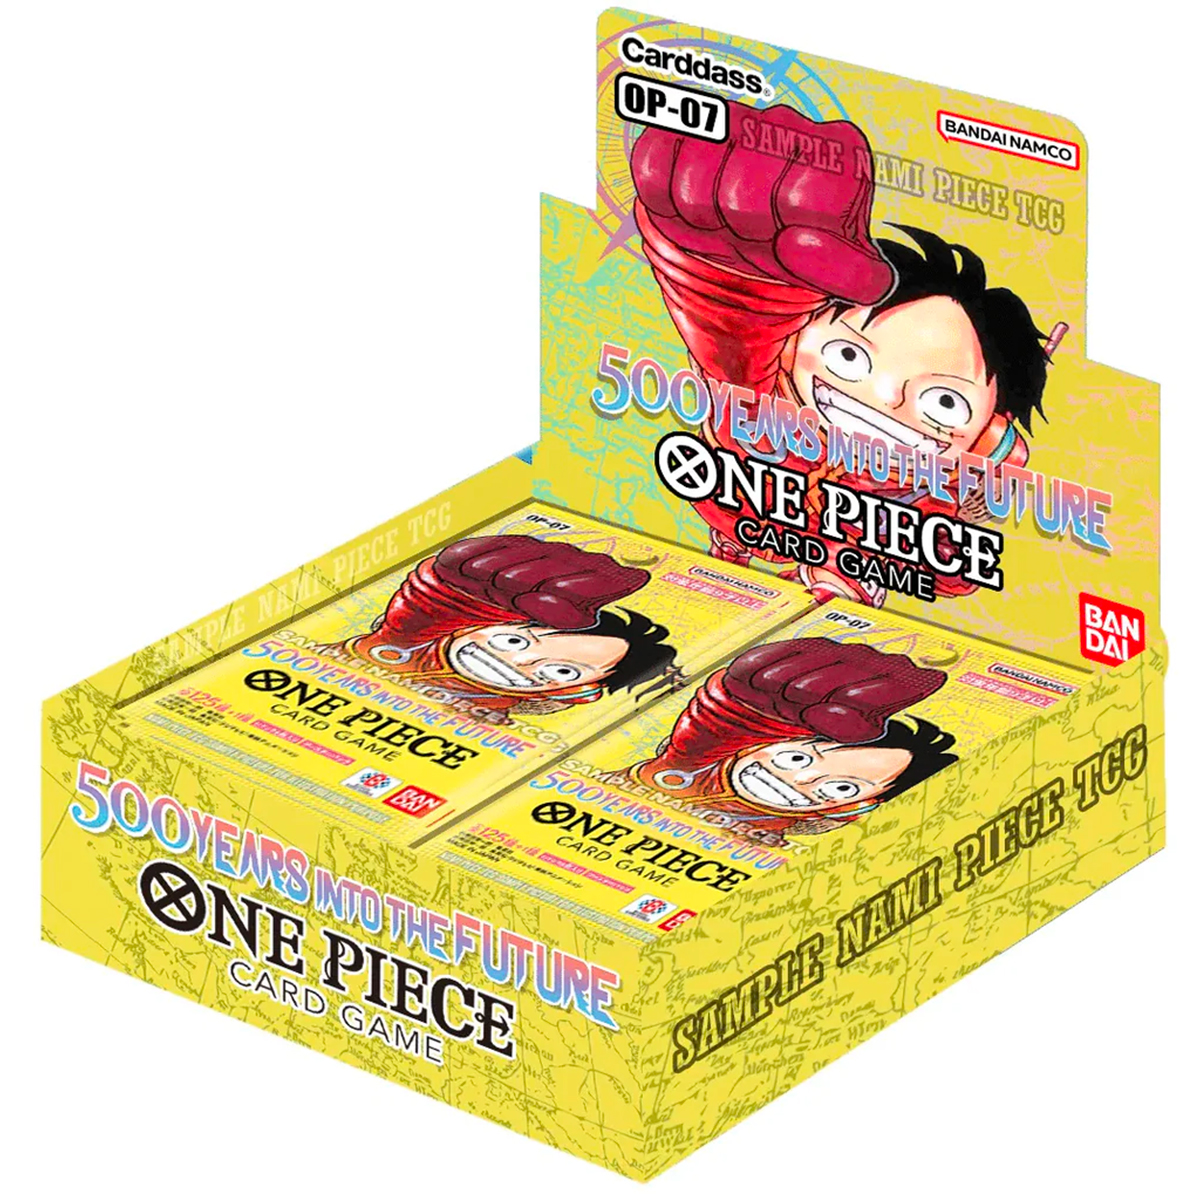 one piece card game - future 500 years later - op-07 - box 24 buste (eng)